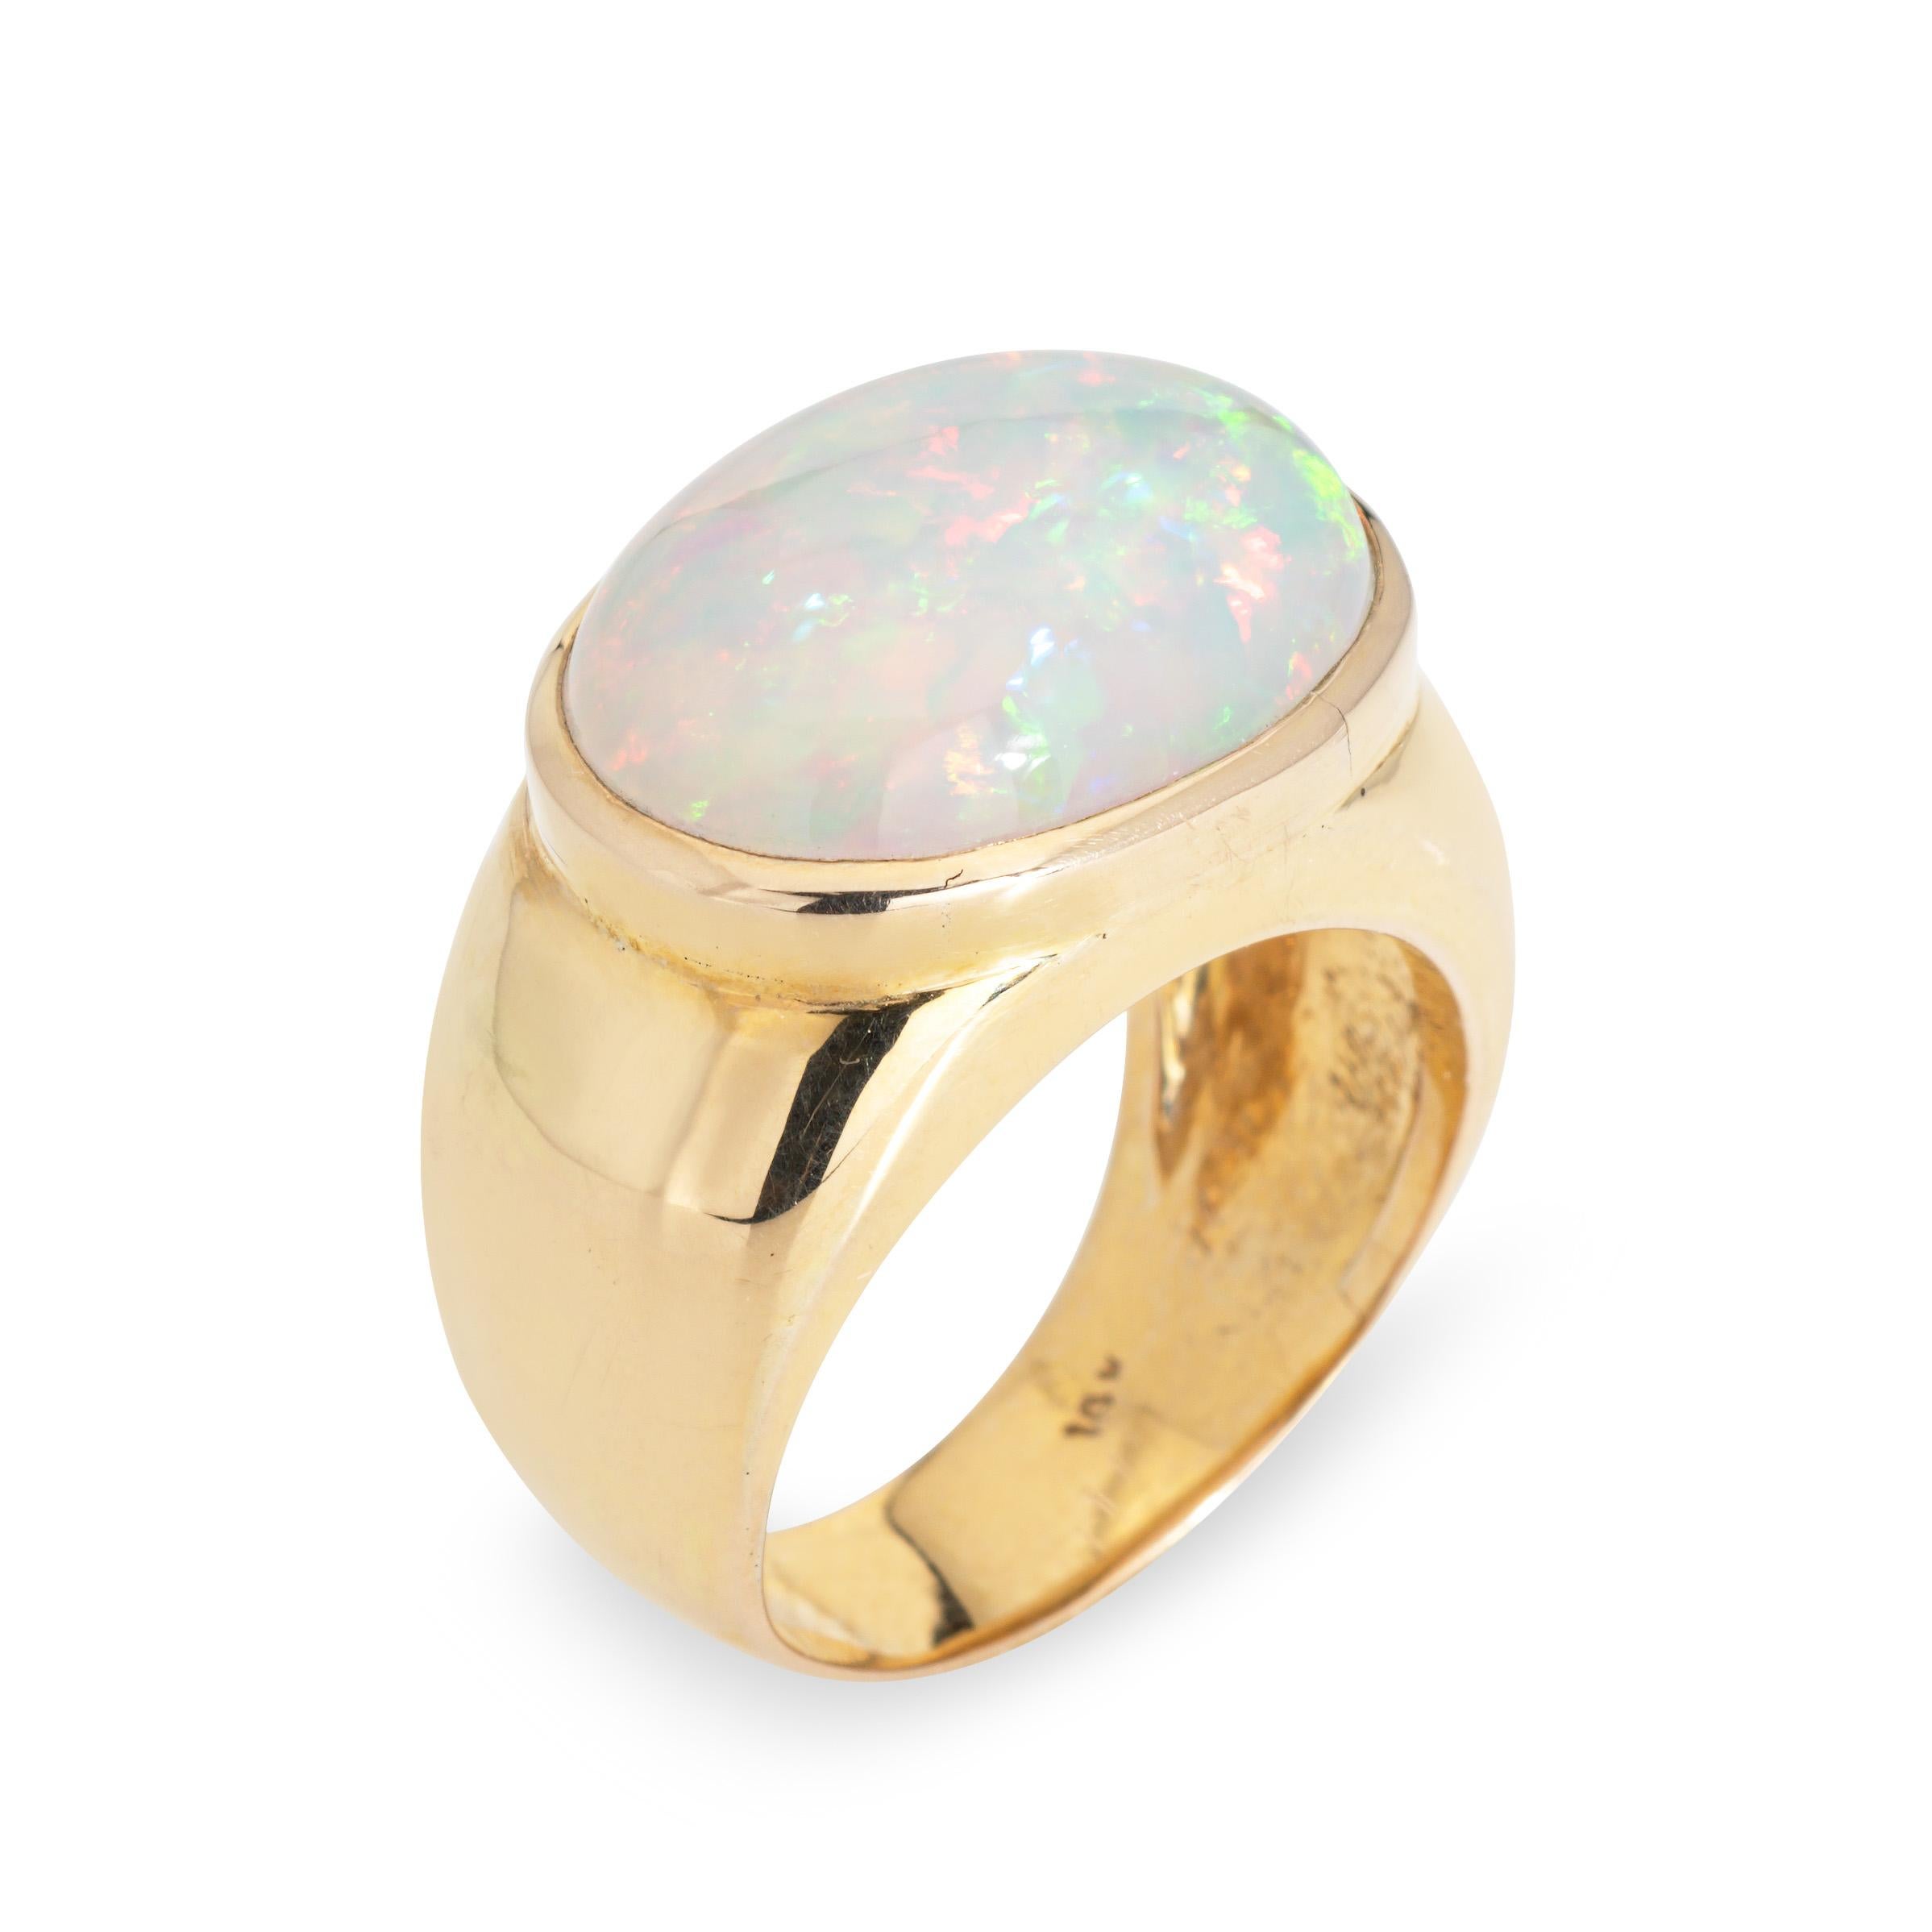 Stylish natural Ethiopian opal & diamond ring crafted in 14k yellow gold. 

Bezel set natural opal measures 19mm x 14mm (estimated at 10 carats). The opal is a later addition to the ring and is in very good condition (free of cracks or chips). 

The